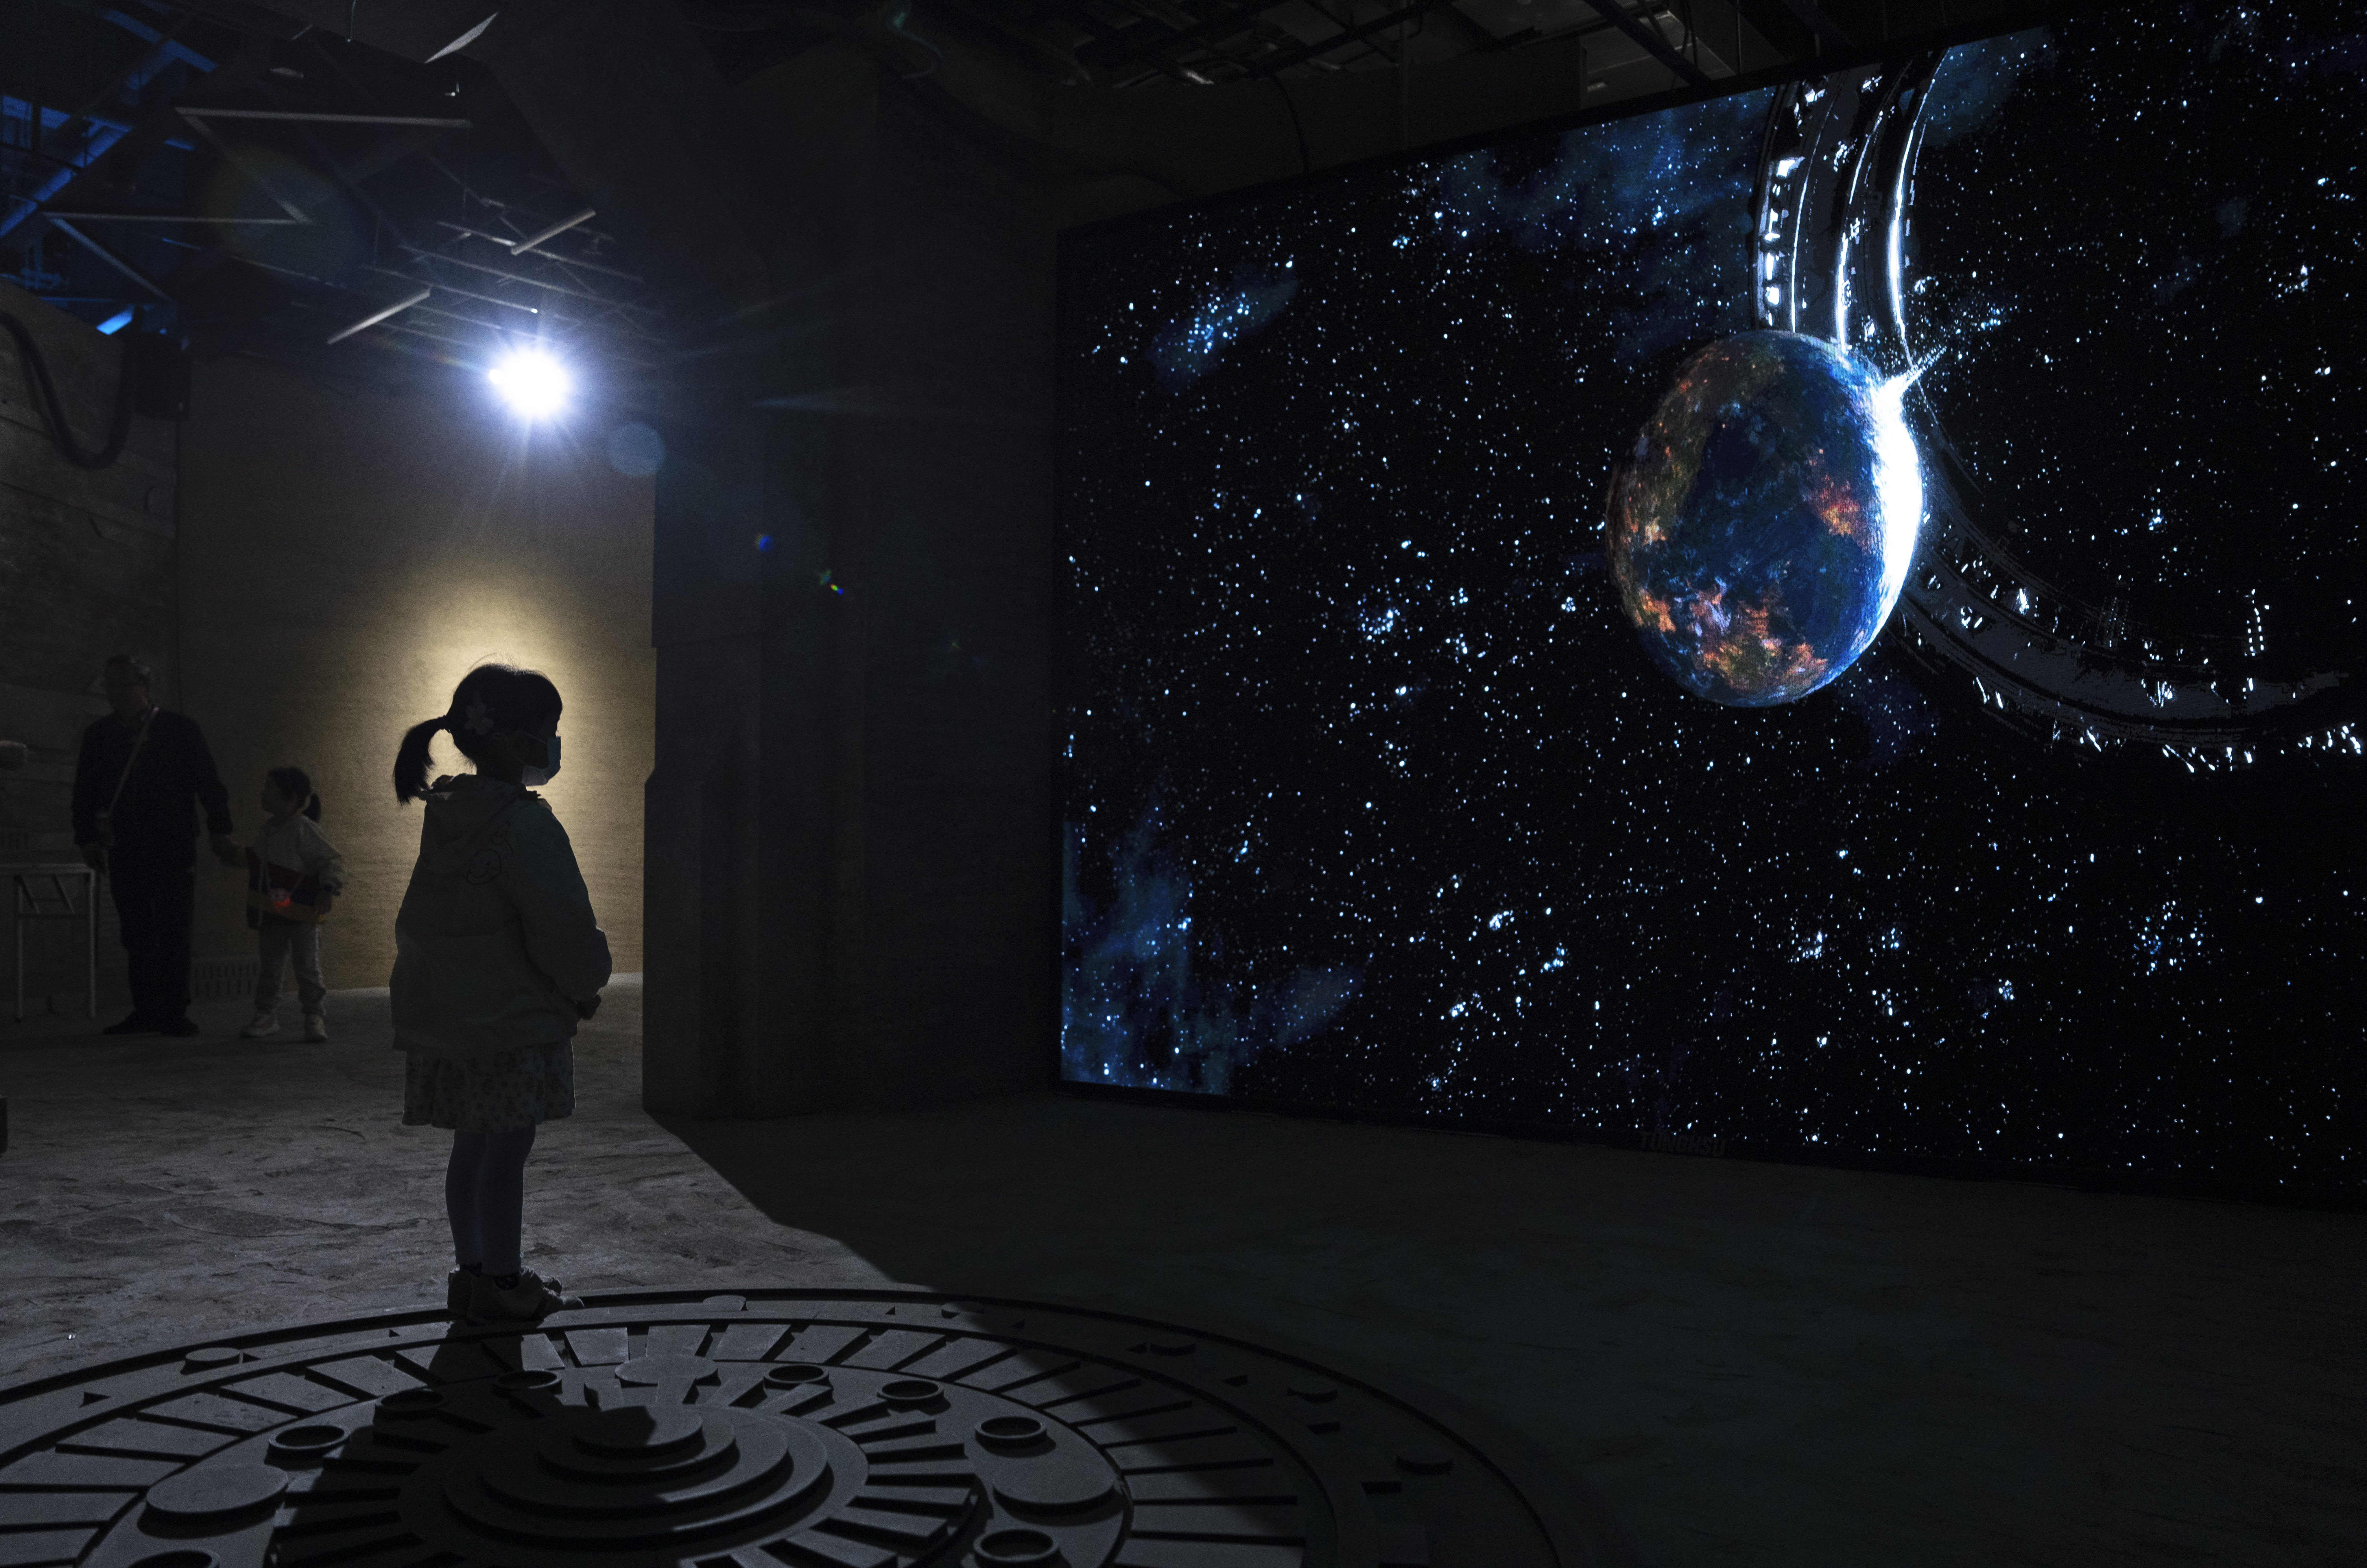 A child watches a video depicting the science fiction universe from a trilogy by Chinese author Liu...